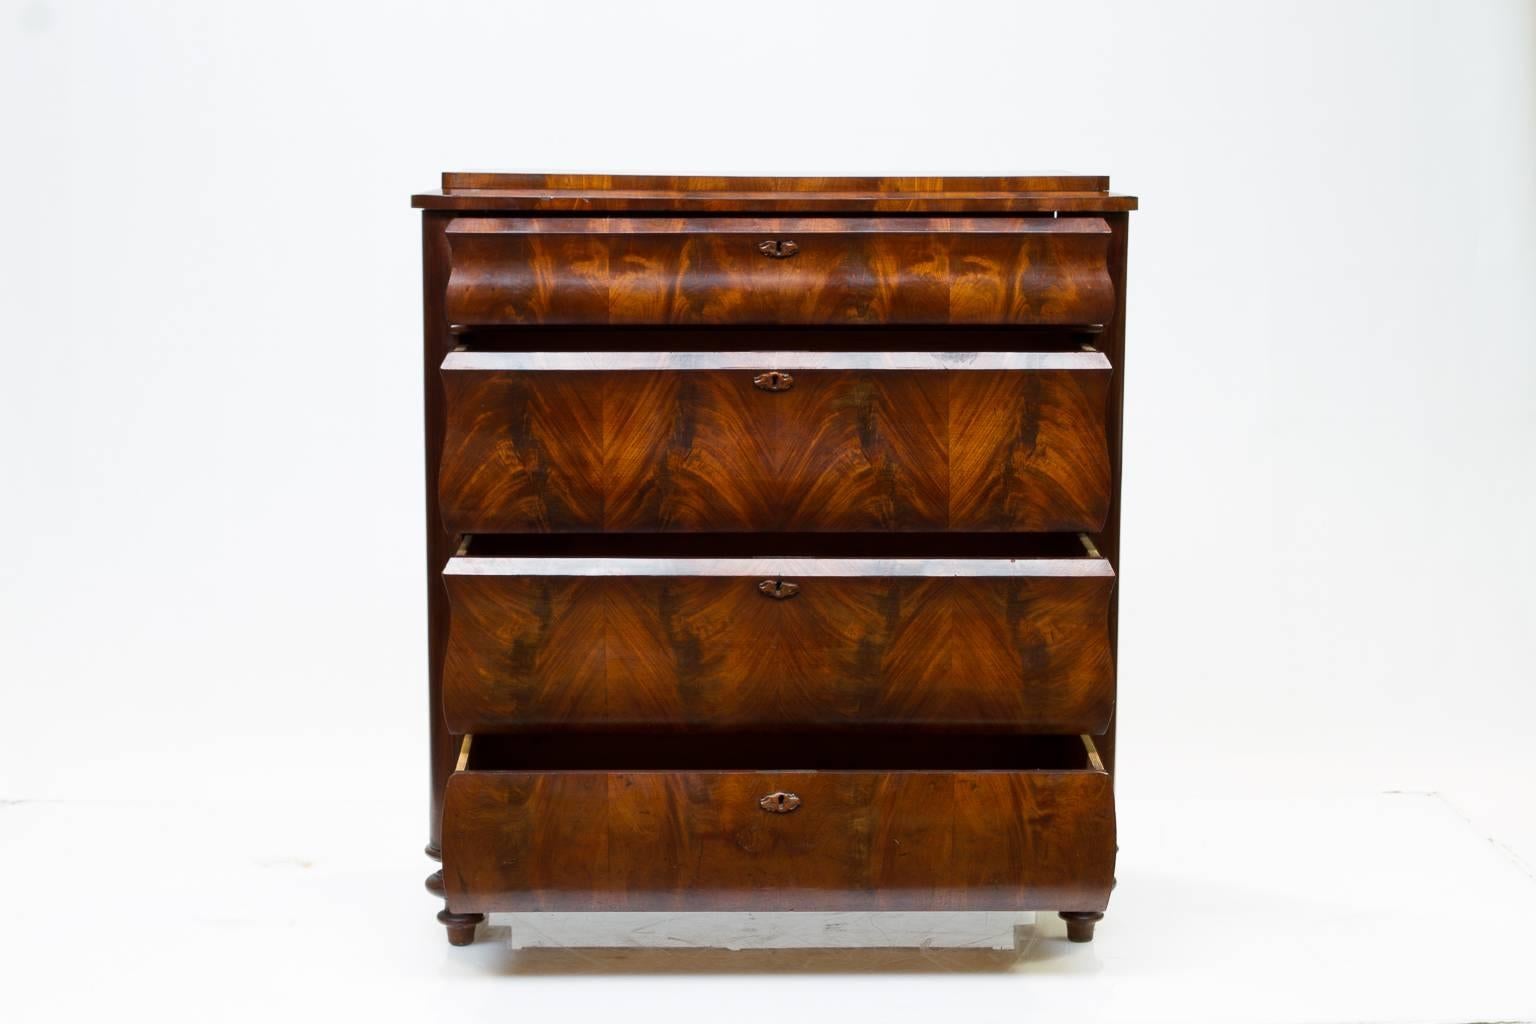 19th century Biedermeier mahogany chest of drawers. Beautiful choice selection of flame mahogany to the drawer fronts which are gracefully curved. Four functional drawers. Unusual tray top then with banded molding accenting the top. Turned feet and